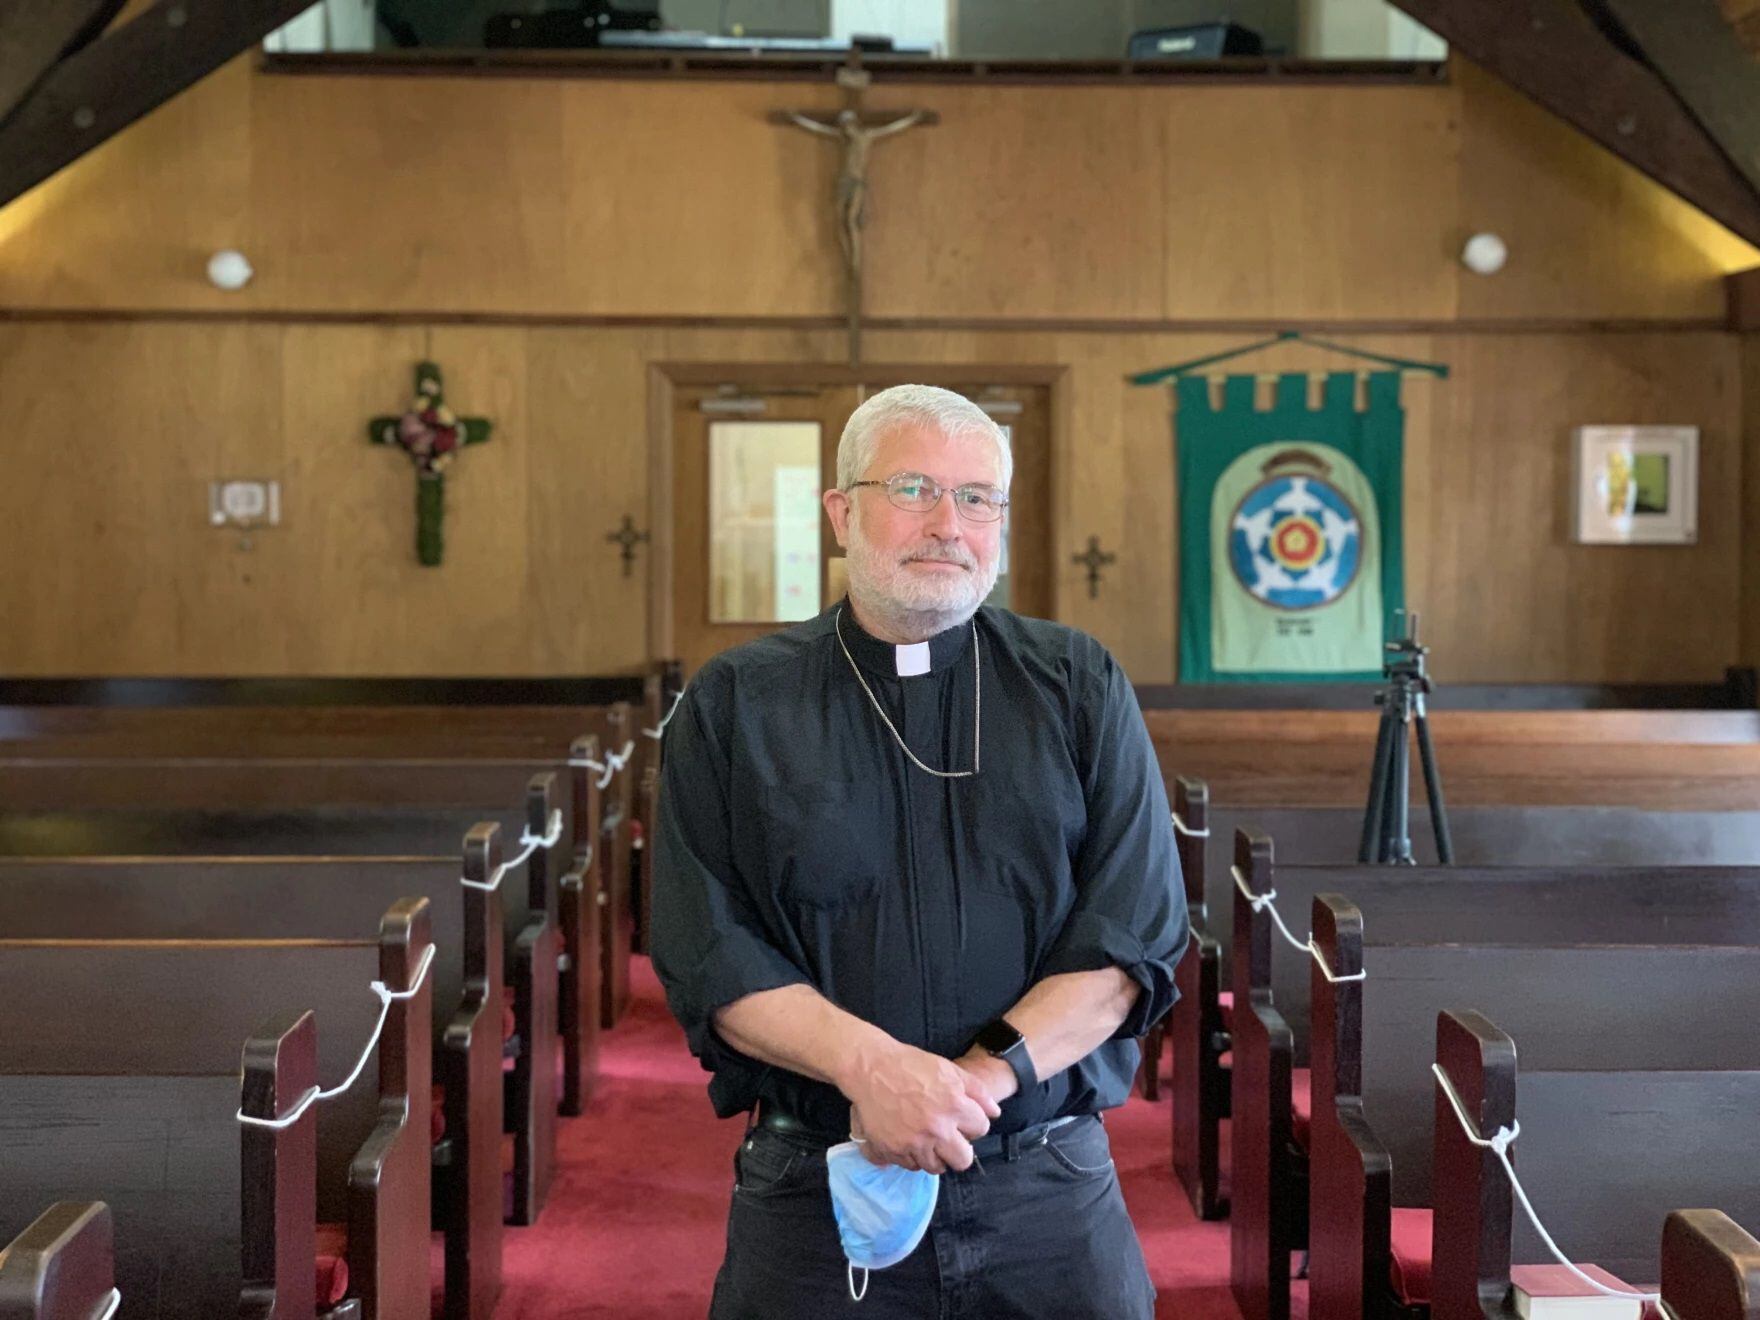 Pastor Bernie Lindley at St. Timothy's Episcopal Church in Brookings. With few resources for homeless people in Curry County Lindley's church congregation has helped homeless residents in need.